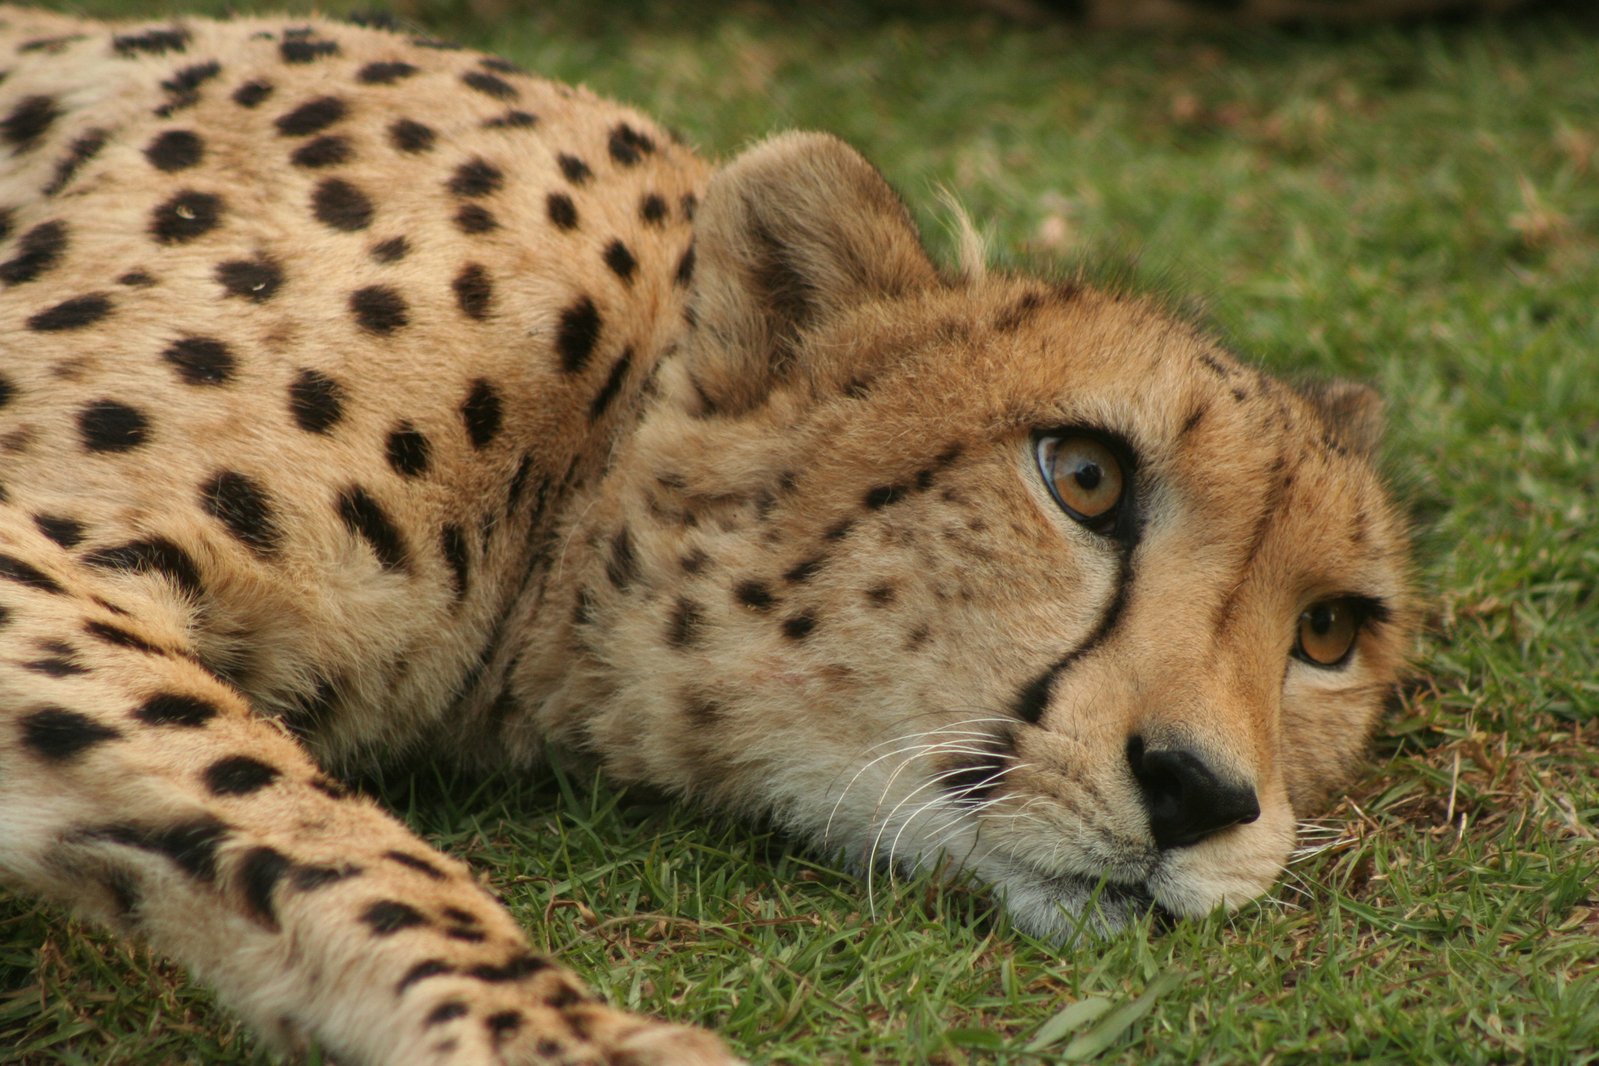 a cheetah laying down in a grassy area